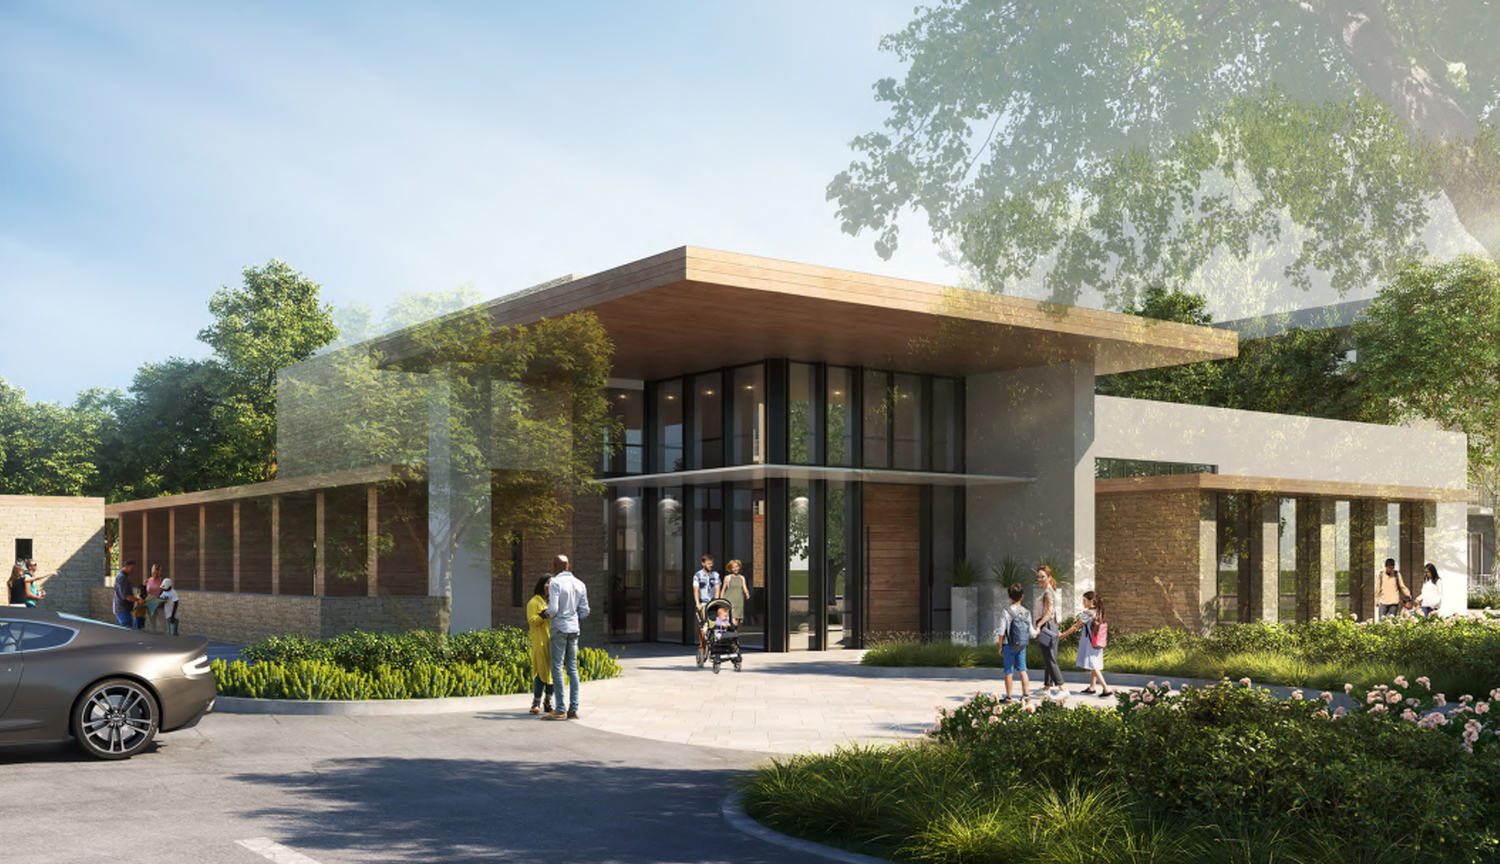 555 West Middlefield Road Block A amenity building, rendering by BDE Architecture